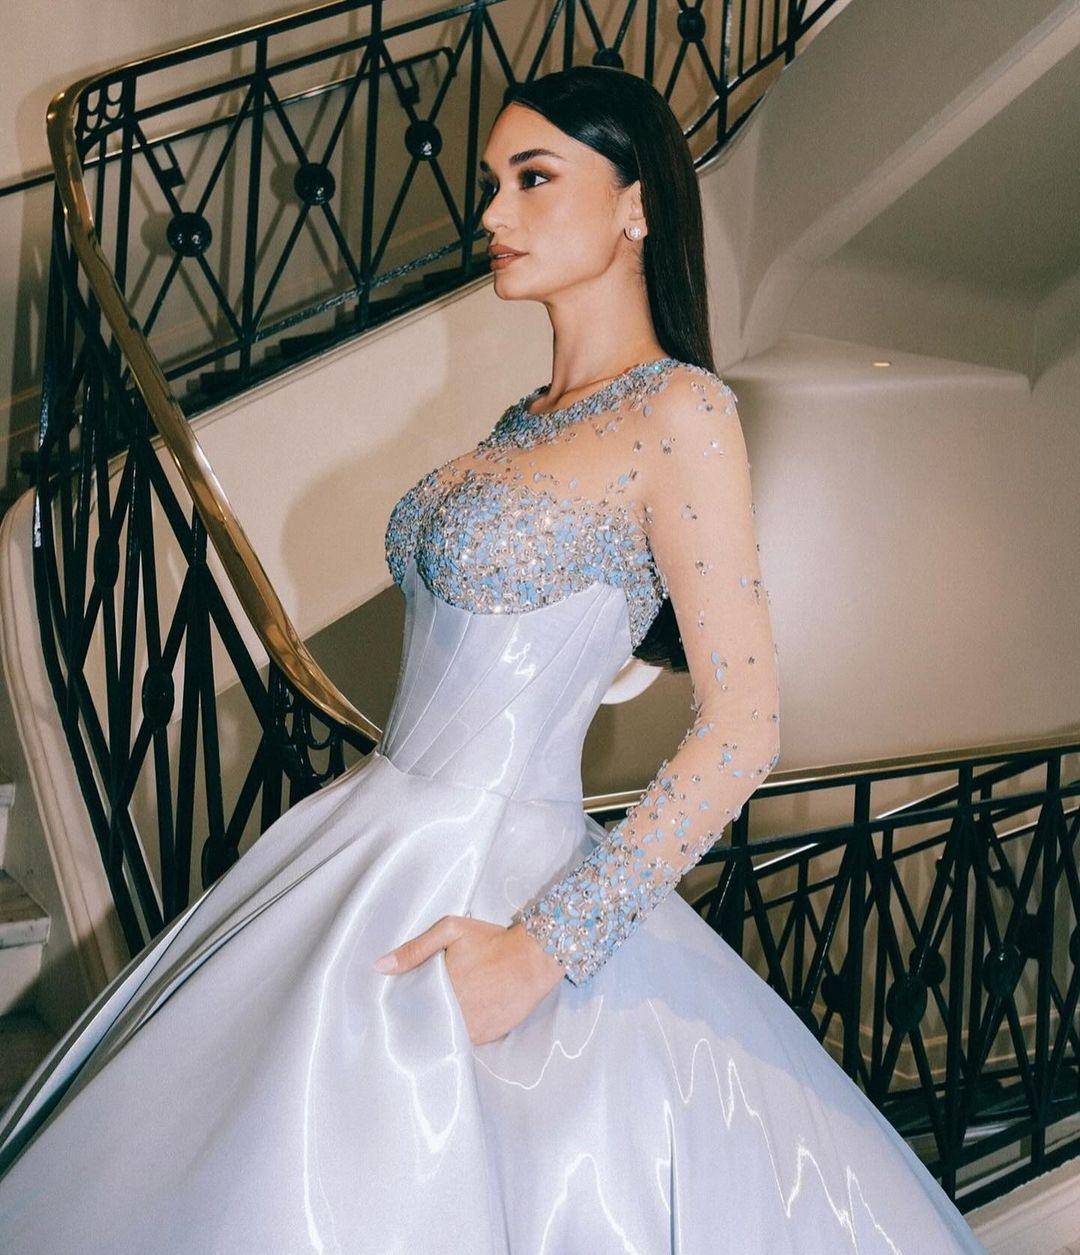 Another look that got people talking was this Cinderella moment by Pia Wurtzbach